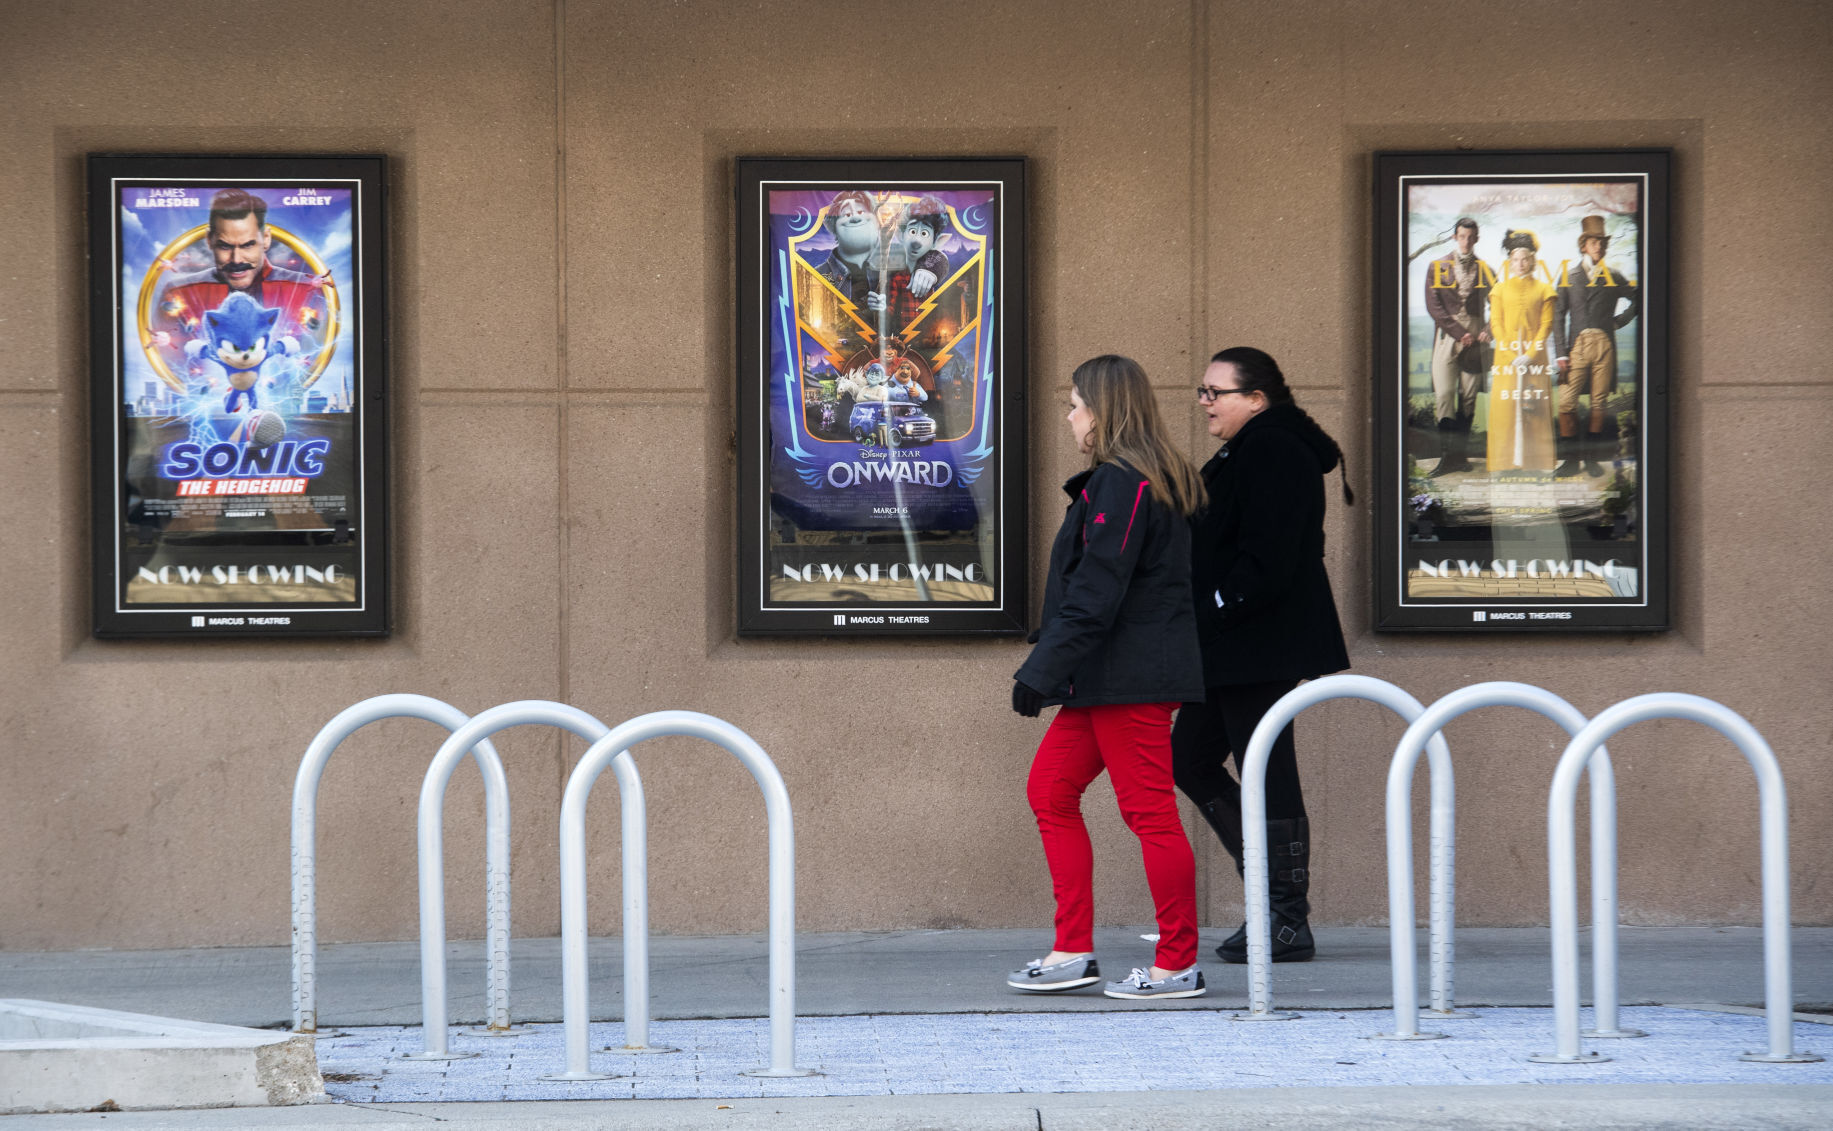 Lincoln movie theaters closed, some films moved to on-demand viewing